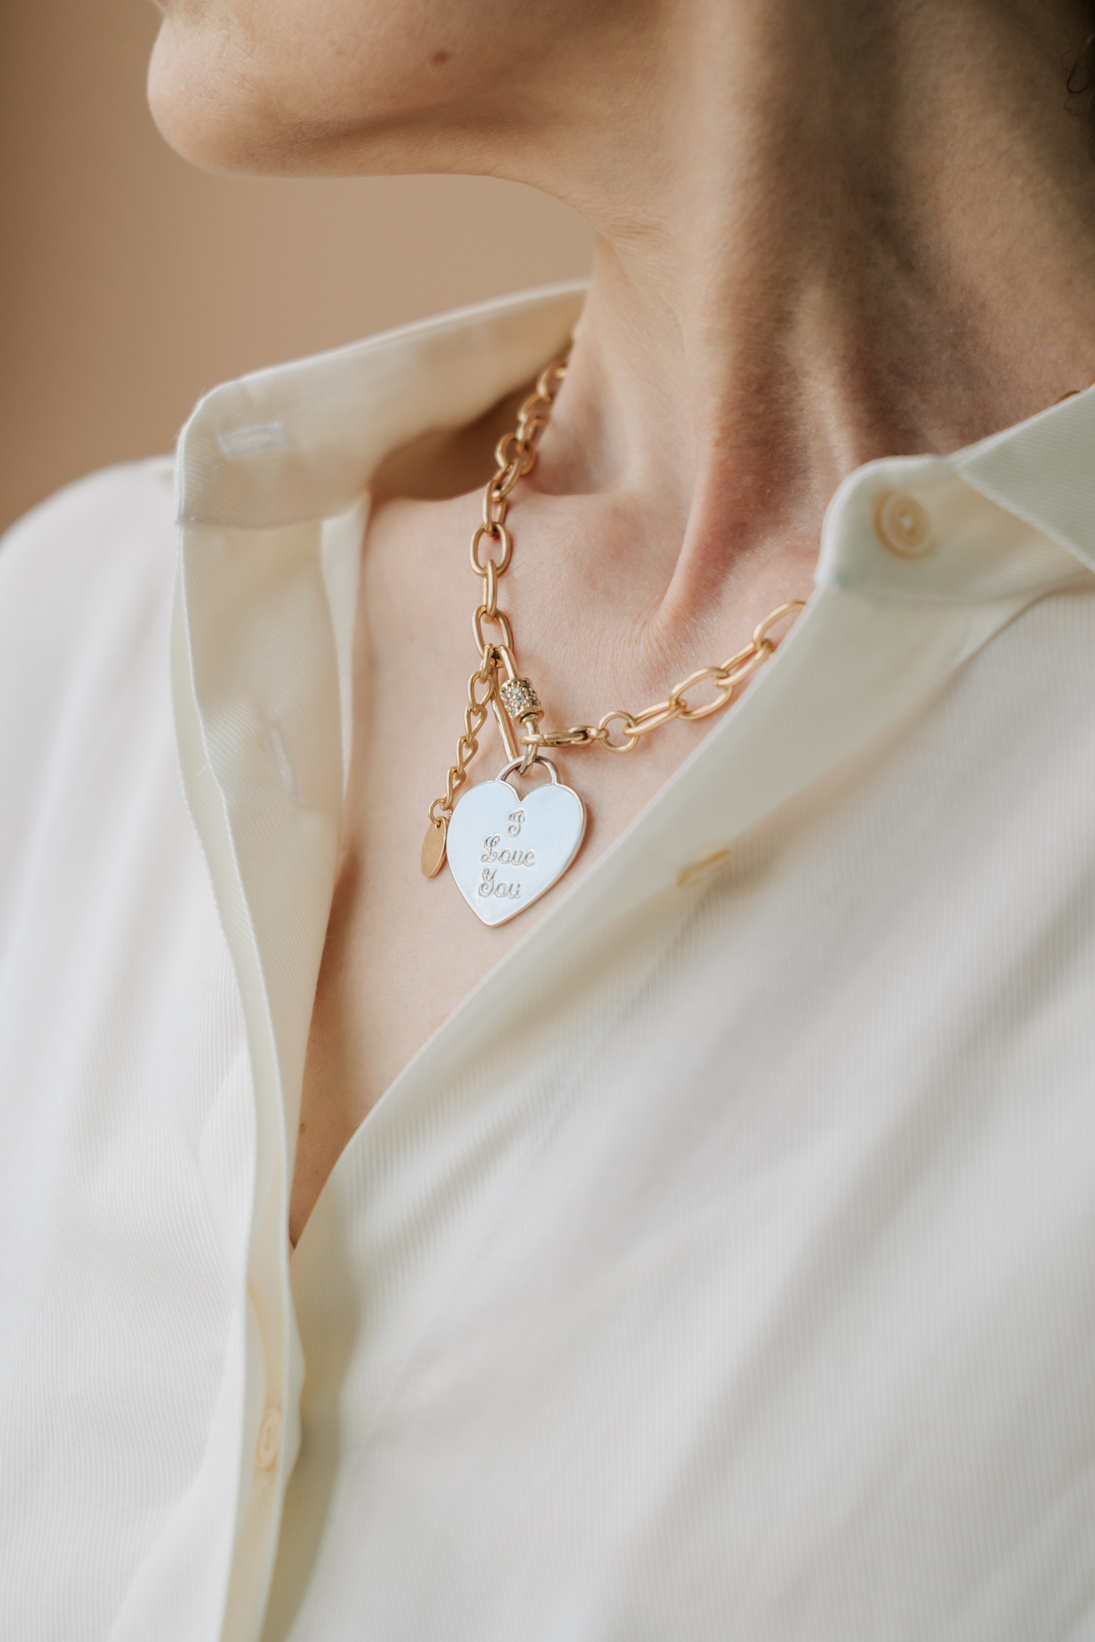 Mature Woman Wearing a Gold Necklace with Heart Pendant